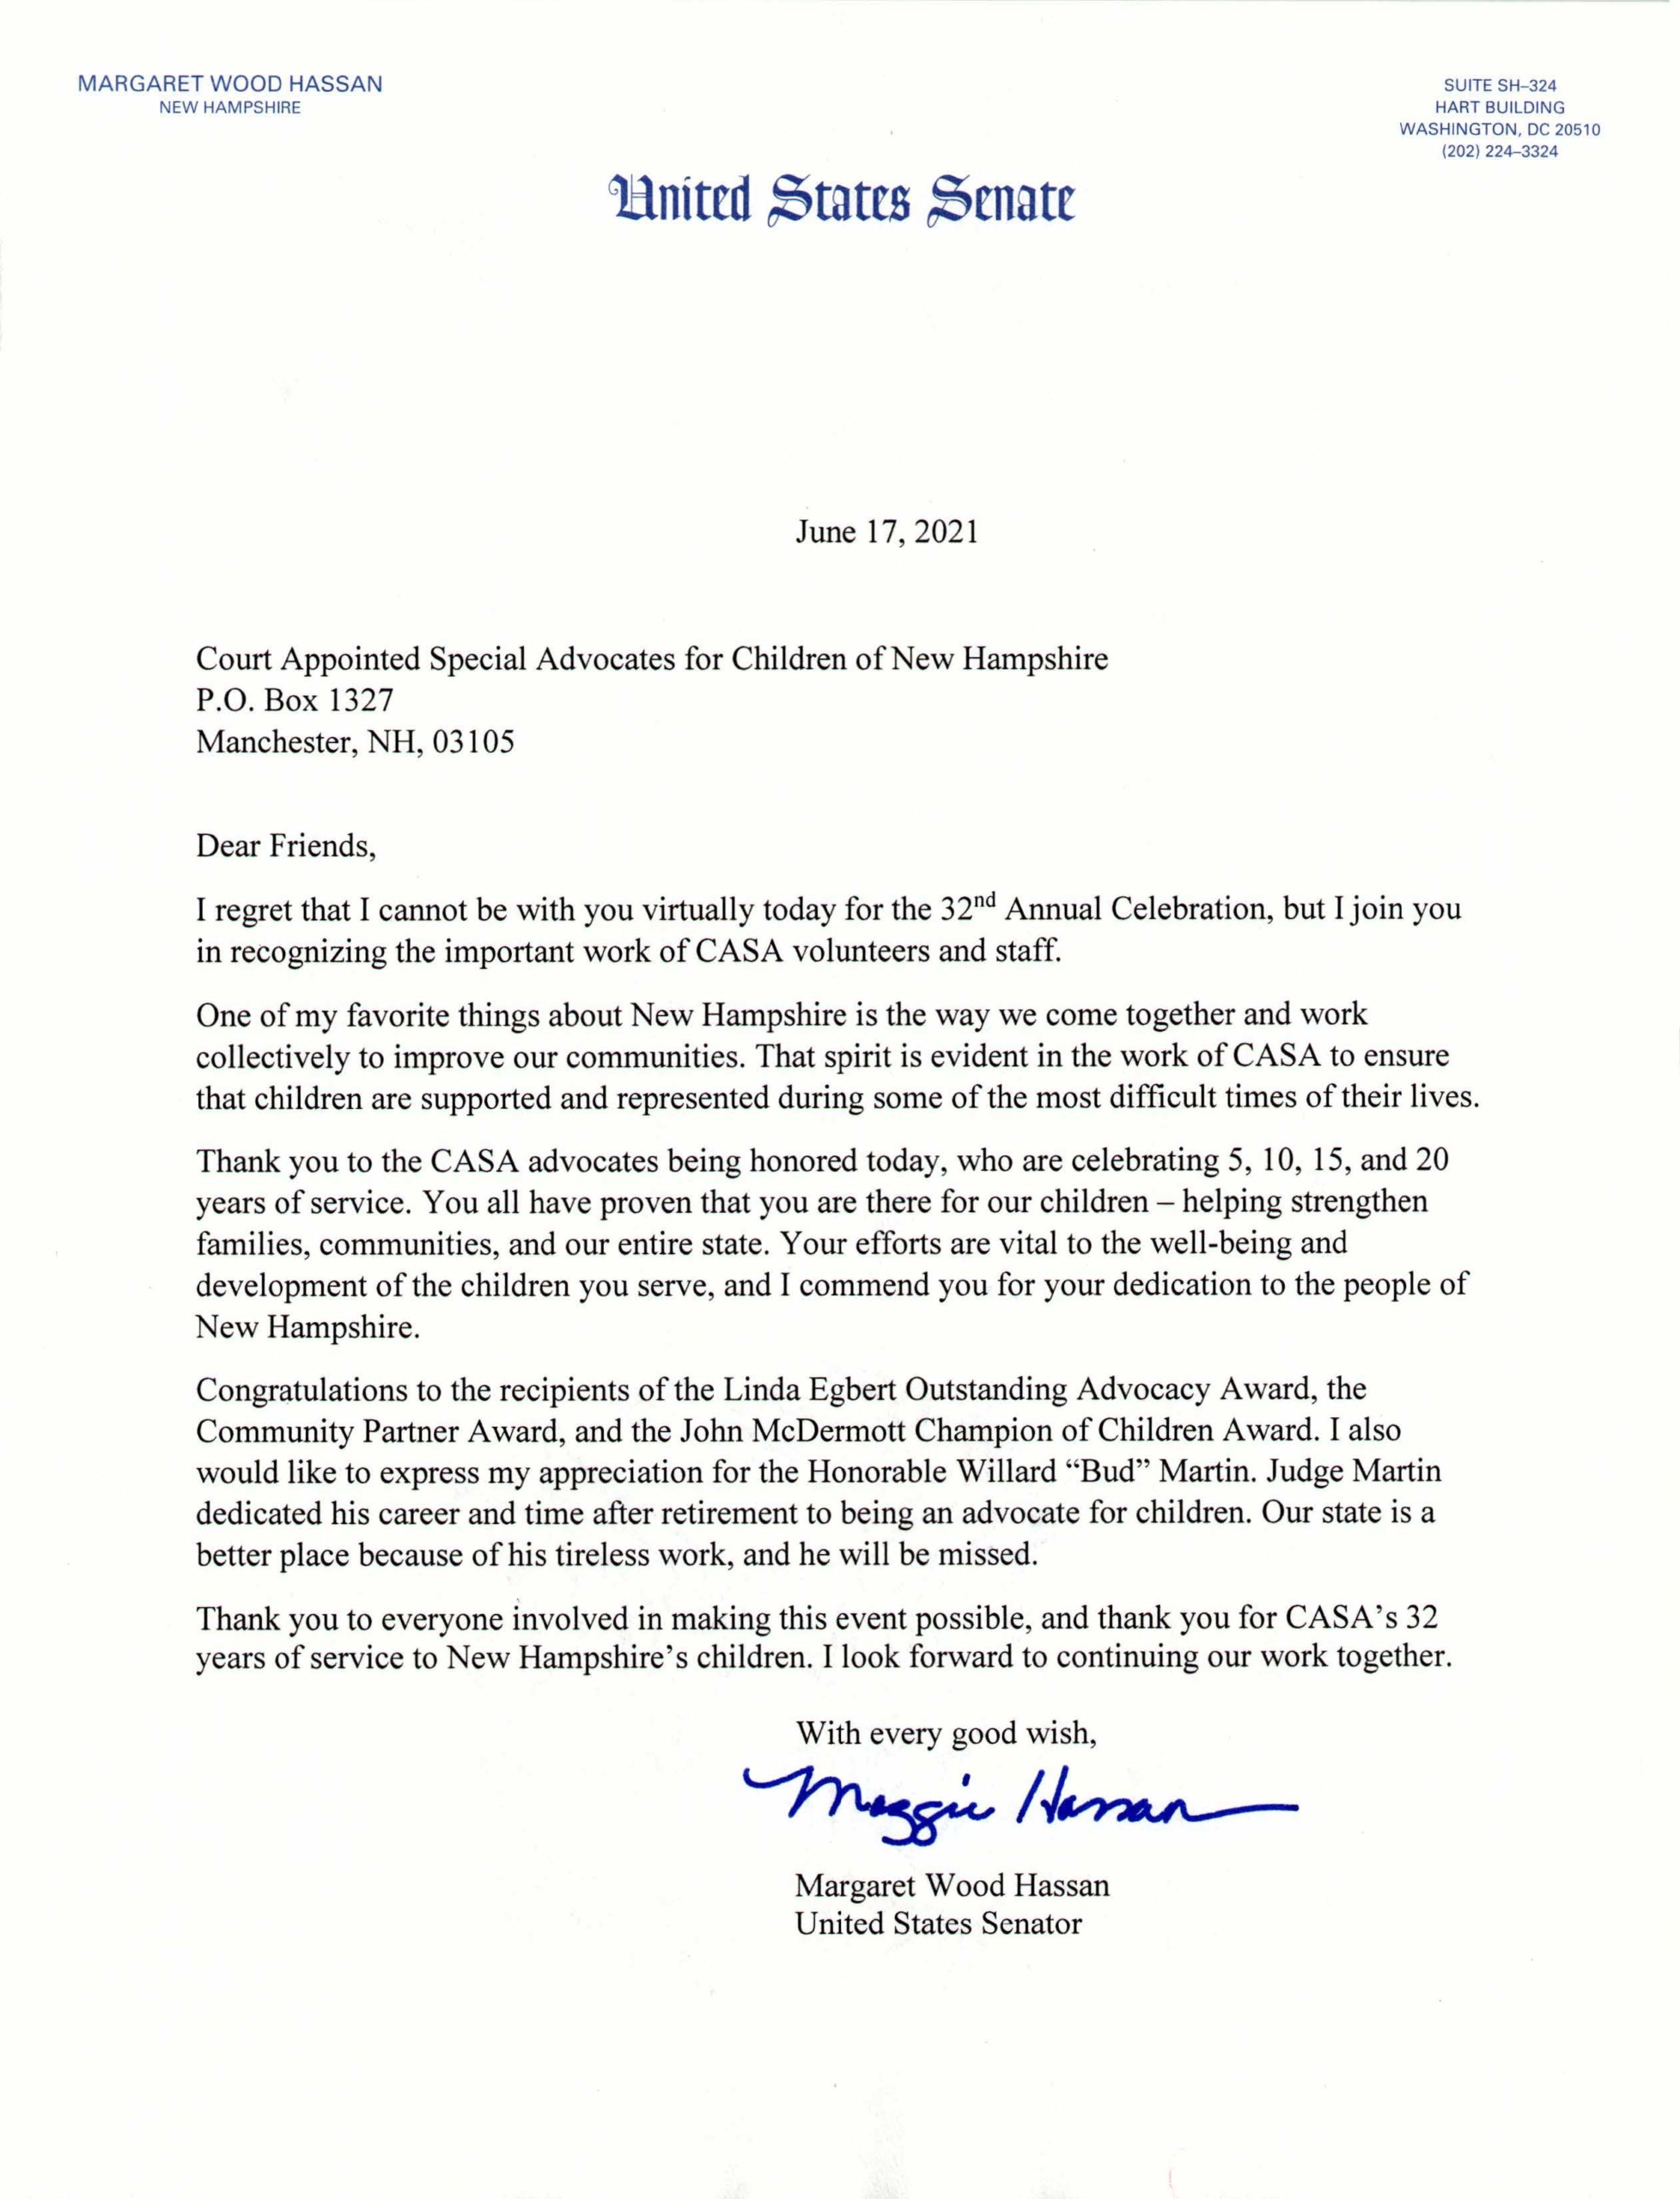 A letter from Sen. Maggie Hassan addressing the importance of CASA's role in New Hampshire.